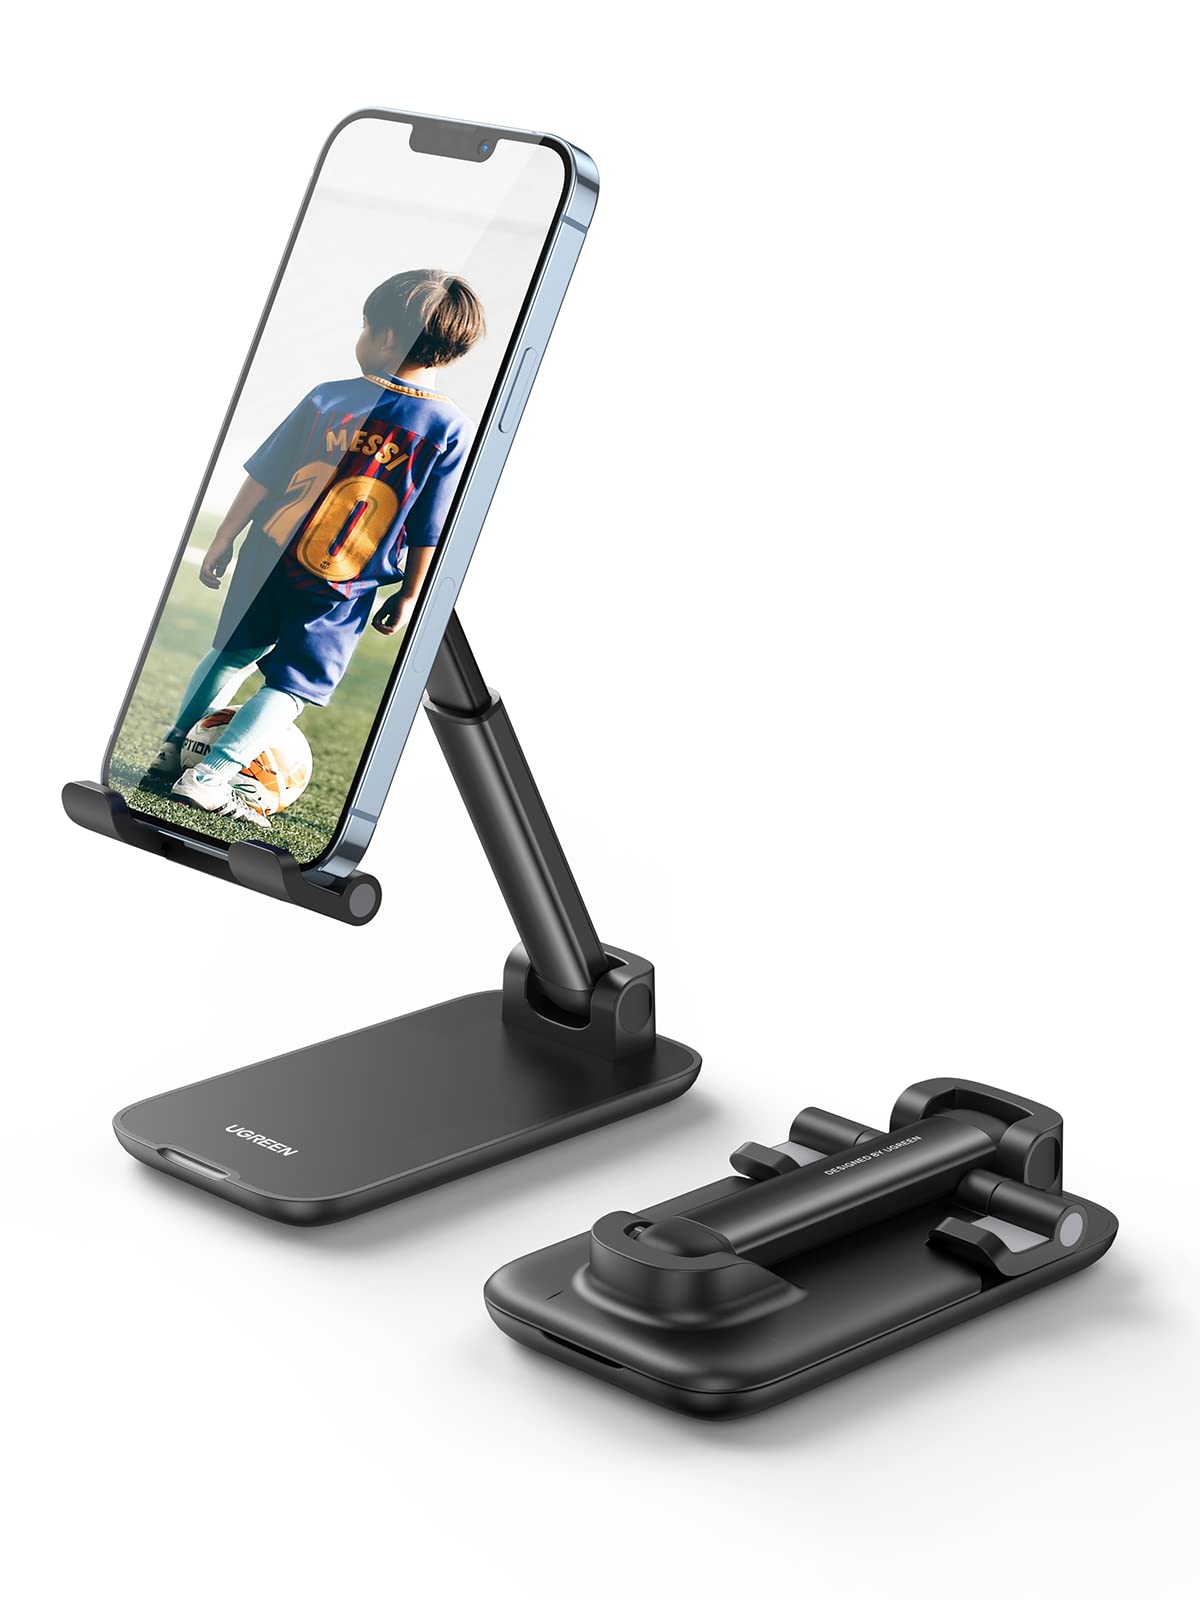 UGREEN Phone Stand, Height Adjustable Phone Holder, Aluminum Foldable iPhone Stand for Desk, Stable Mobile Stand Holder Compatible with Most Phones, iPhone 15 Pro/Pro Max, Samsung Galaxy, iPad Black